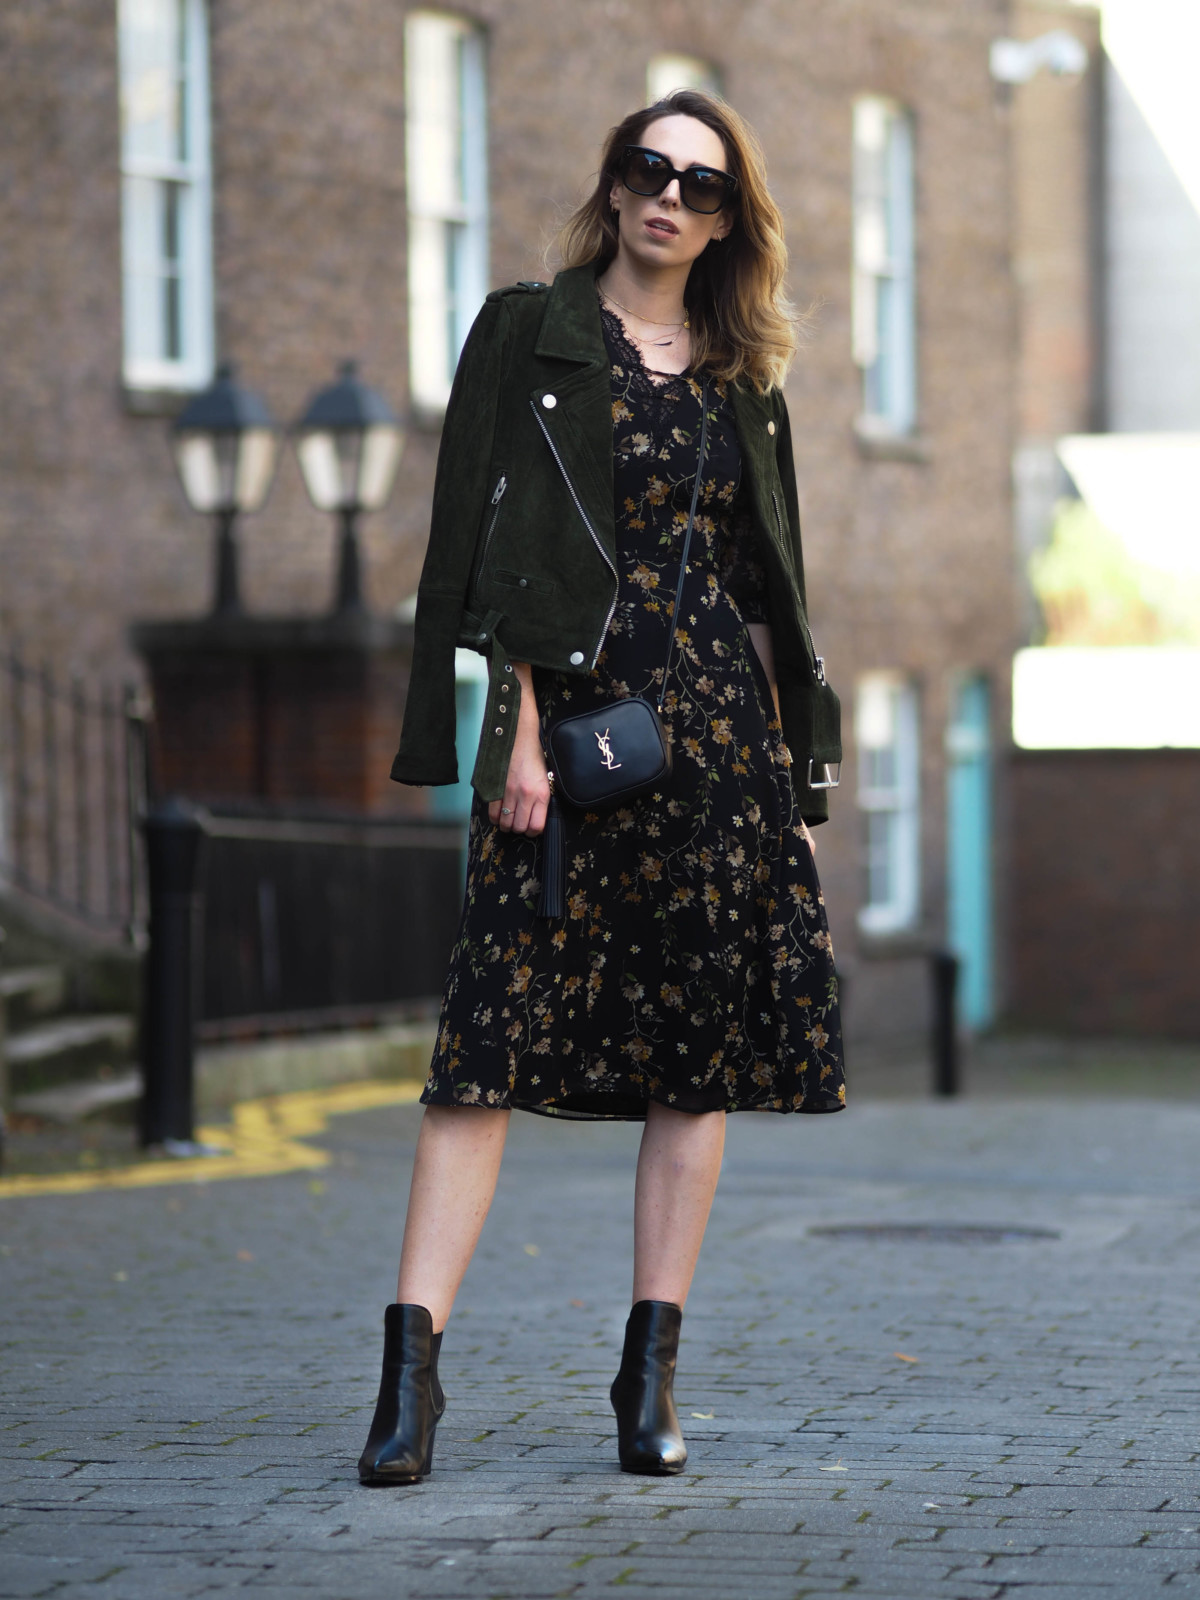 A/W Styling Hack: How to wear Autumn Florals